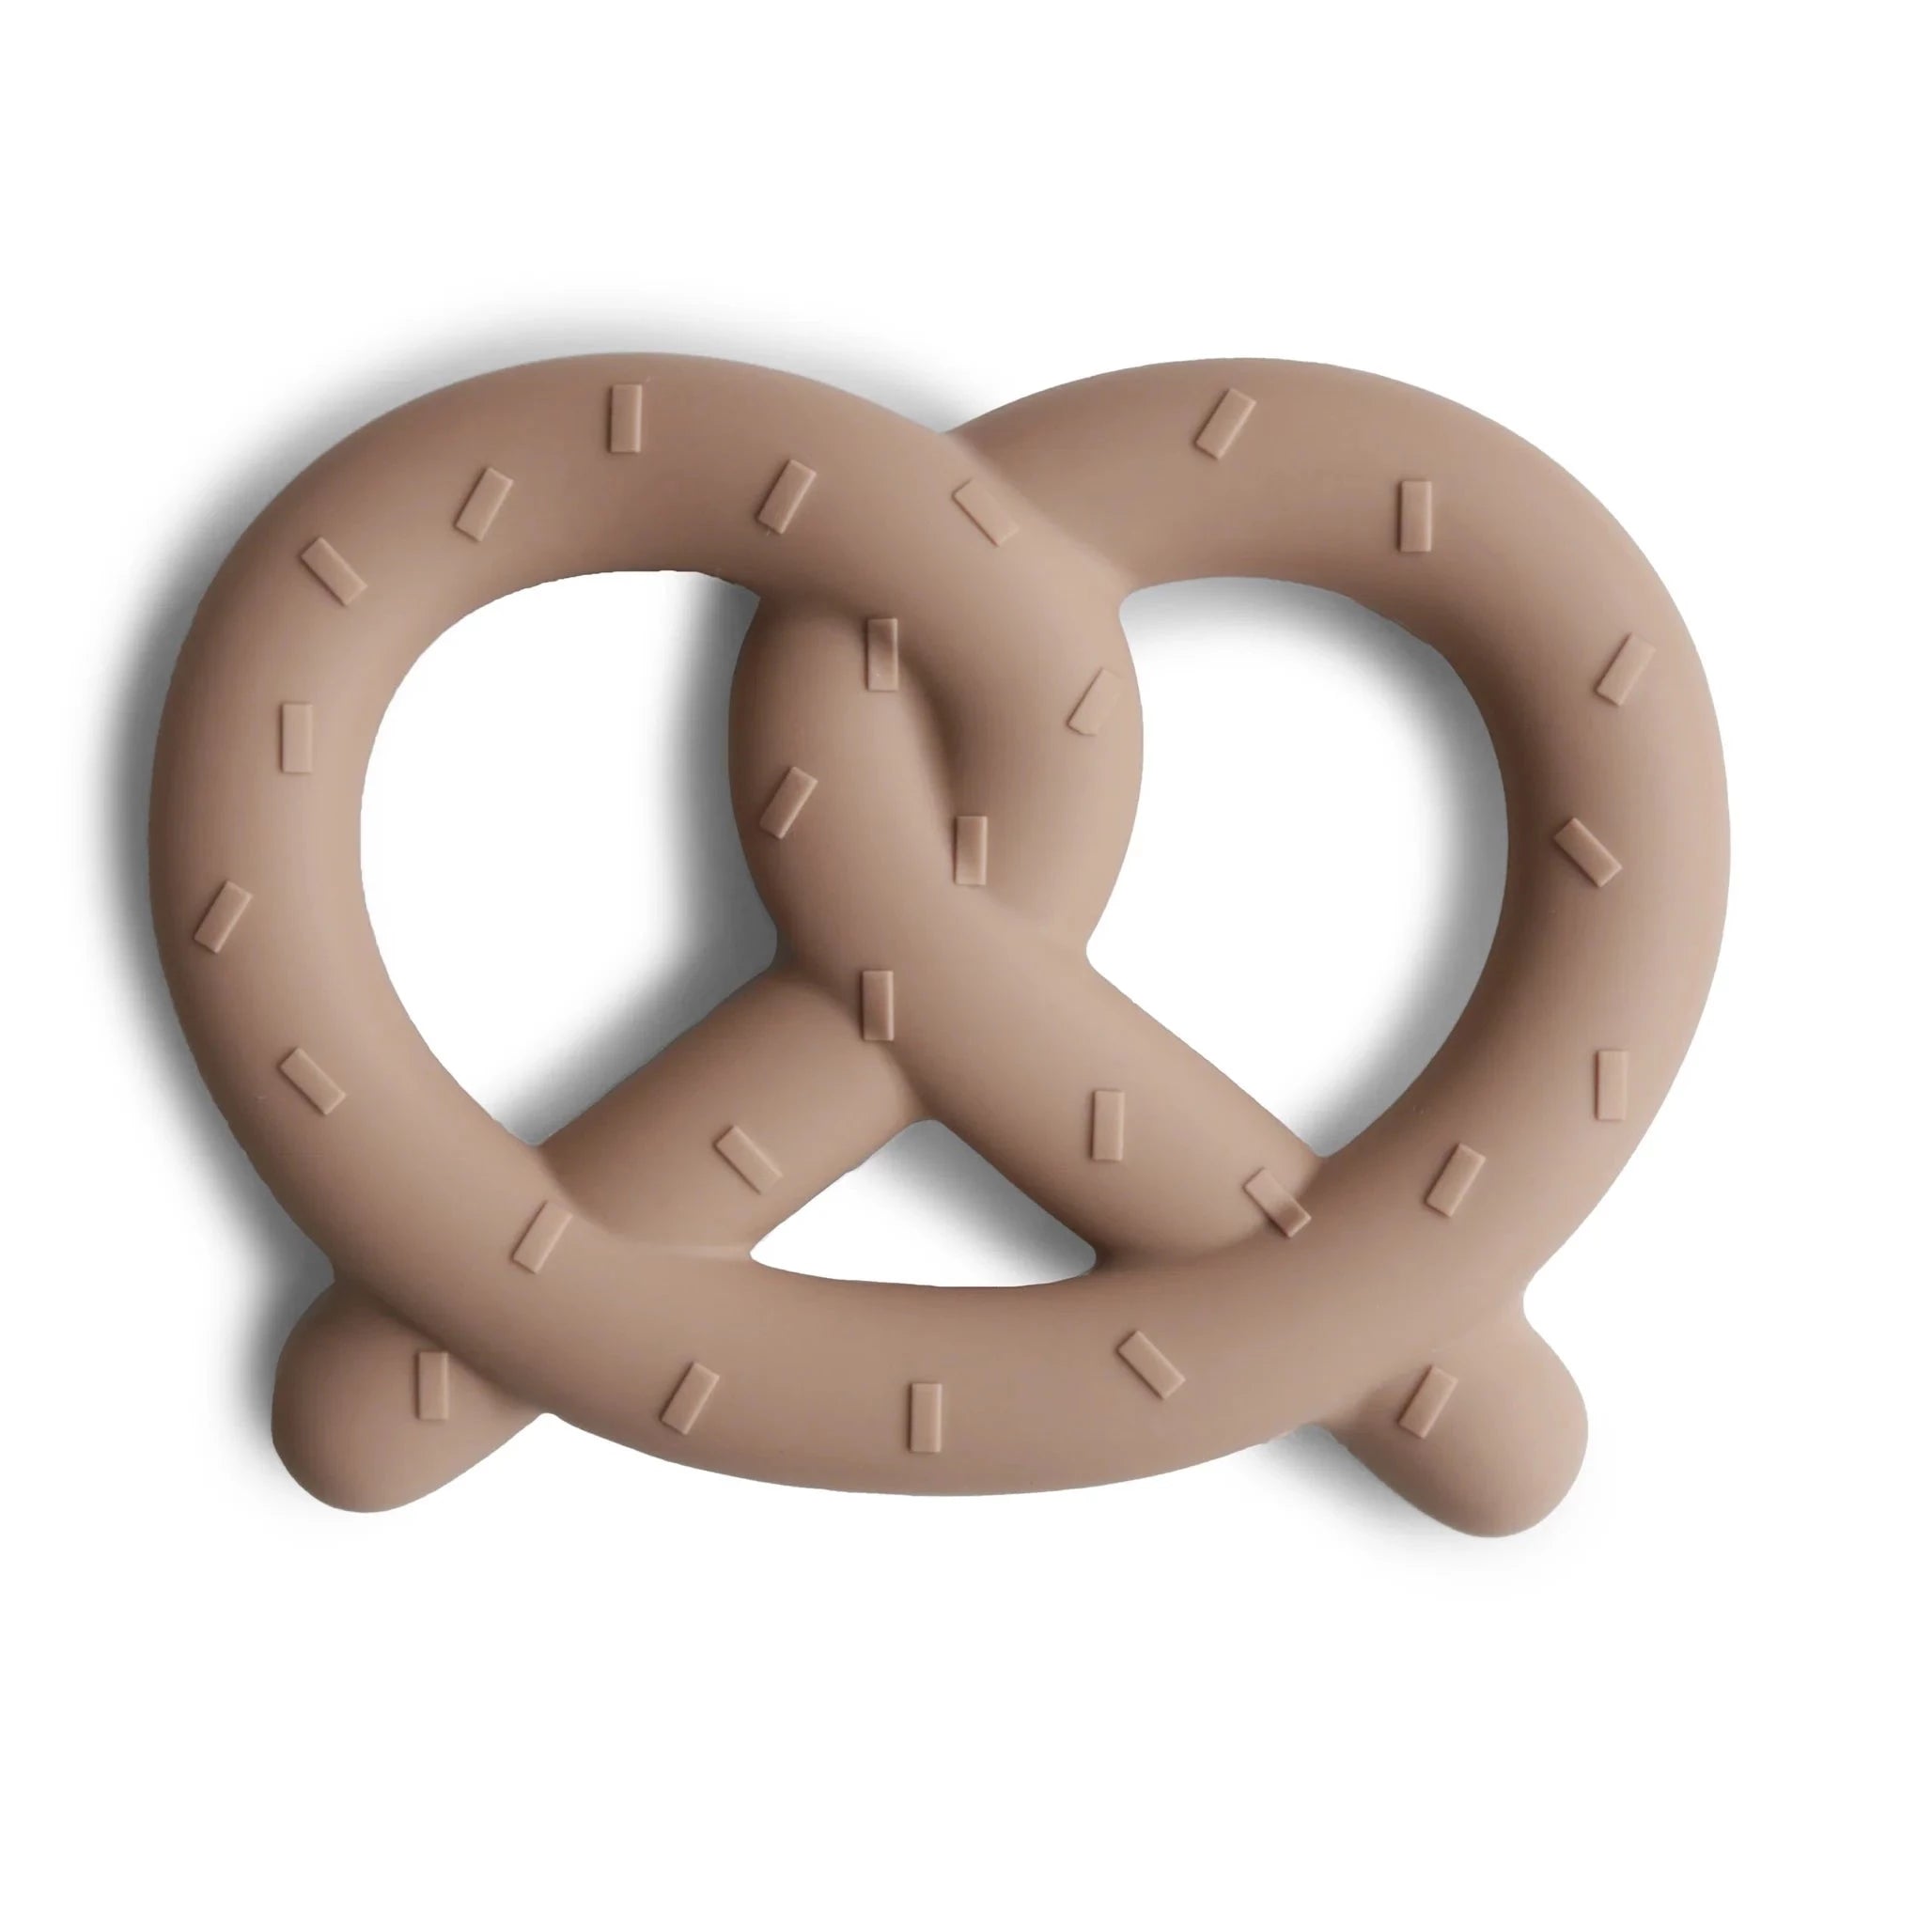 Brown pretzel shaped teether with salt specks embossed into it